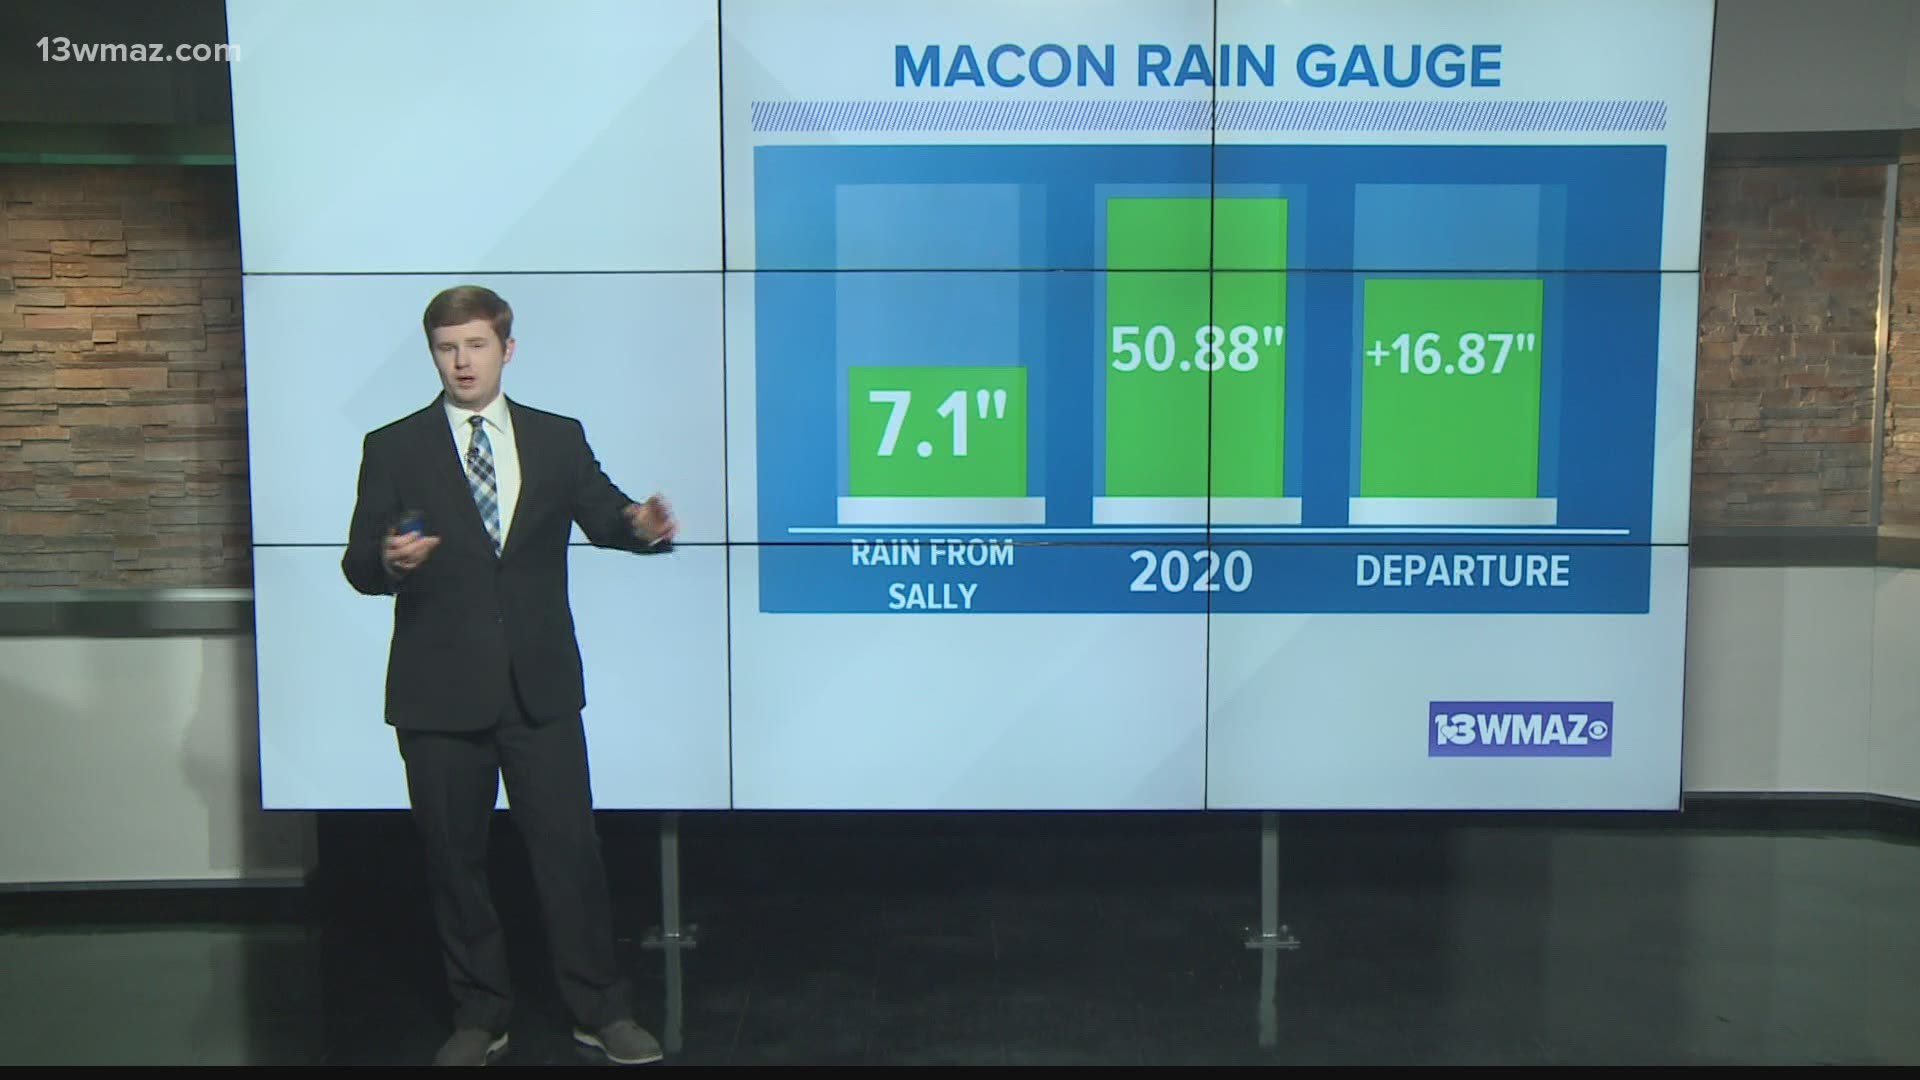 Sally was responsible for over 7 inches of rain in Macon. This pushes the yearly total to over 50 inches.